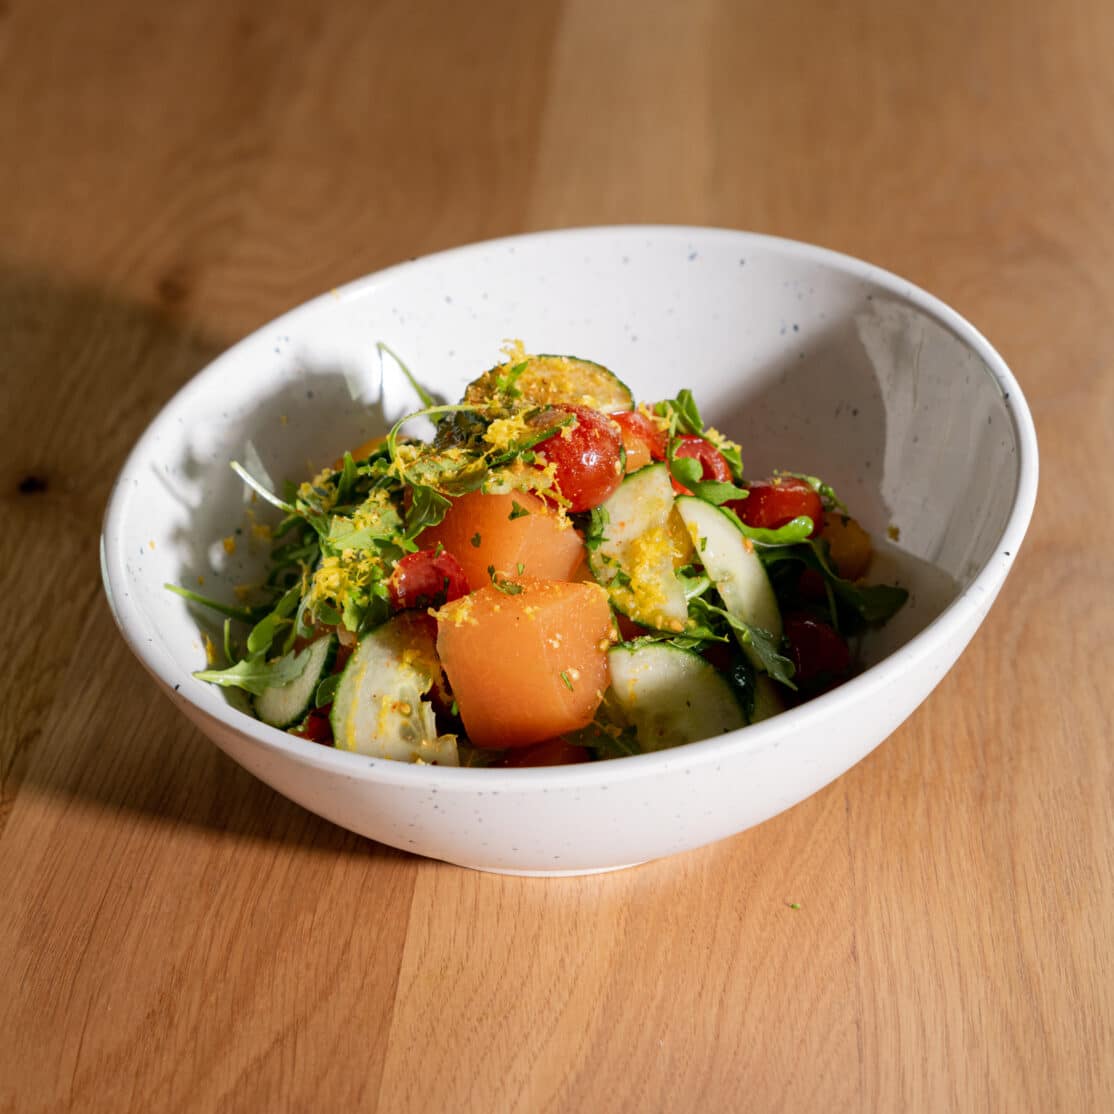 A white bowl filled with a salad on top of a wooden table.